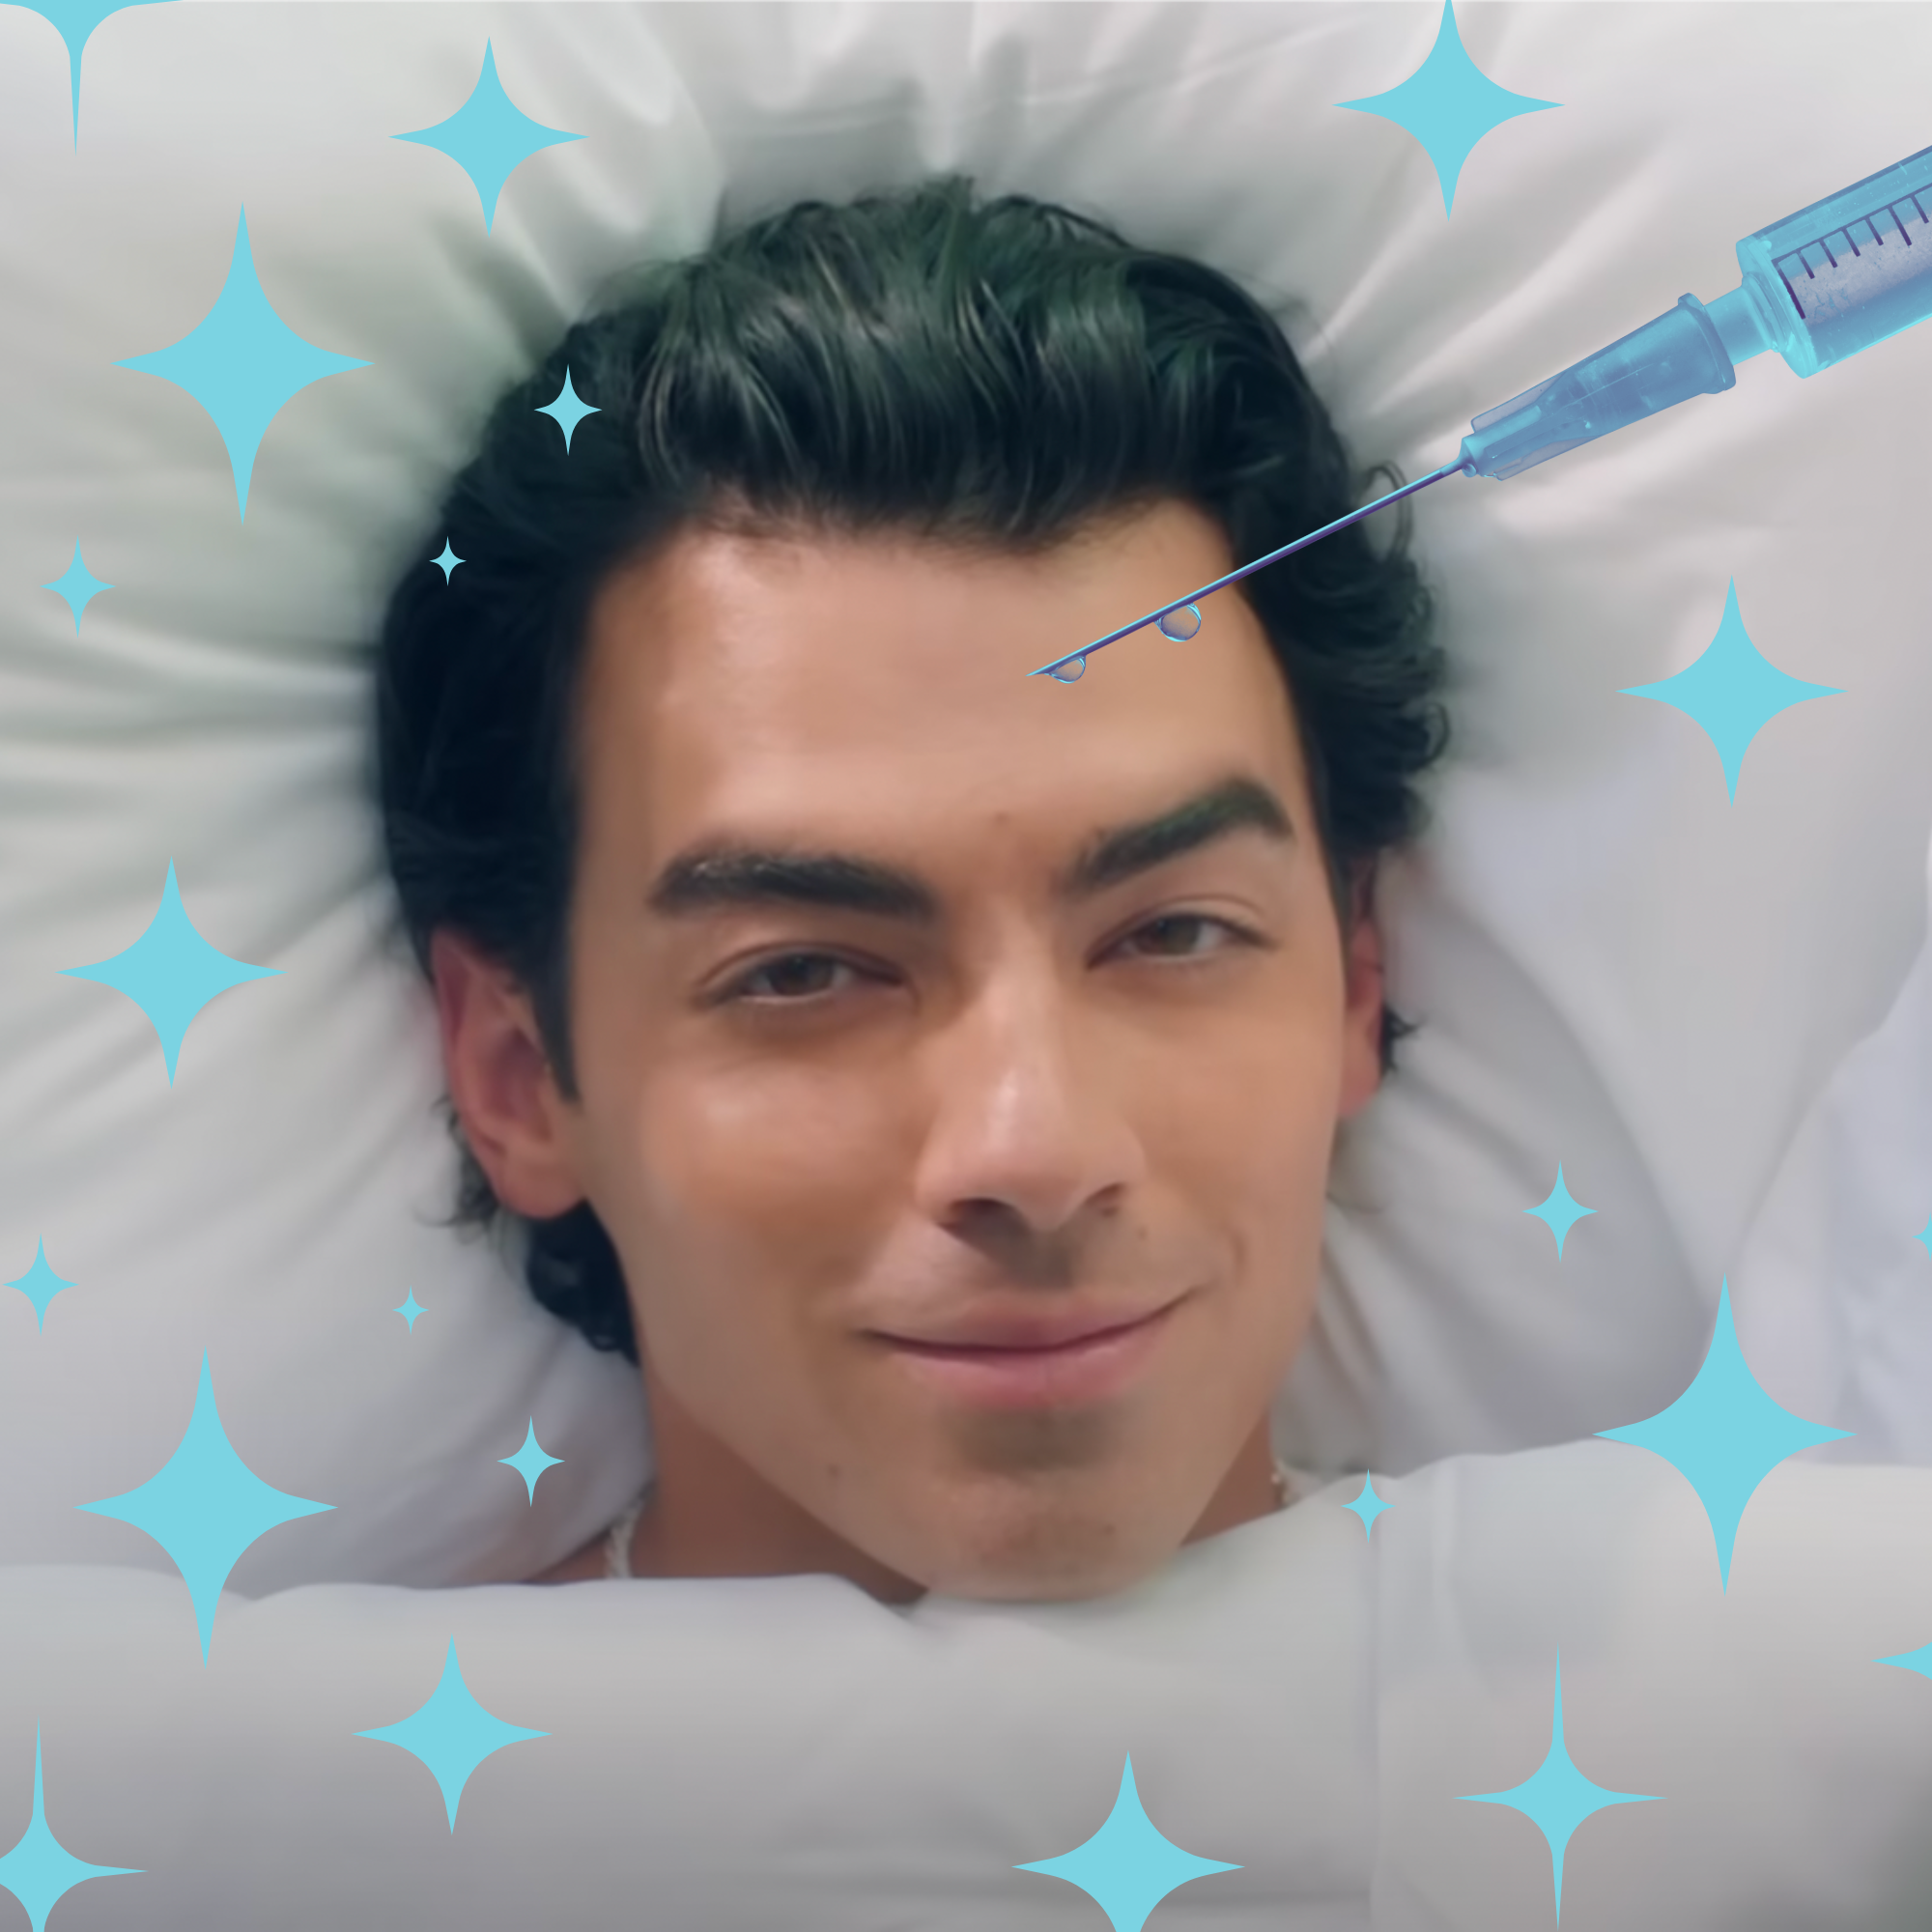 Joe Jonas gets anti-wrinkle injections, and maybe you want them now, too?